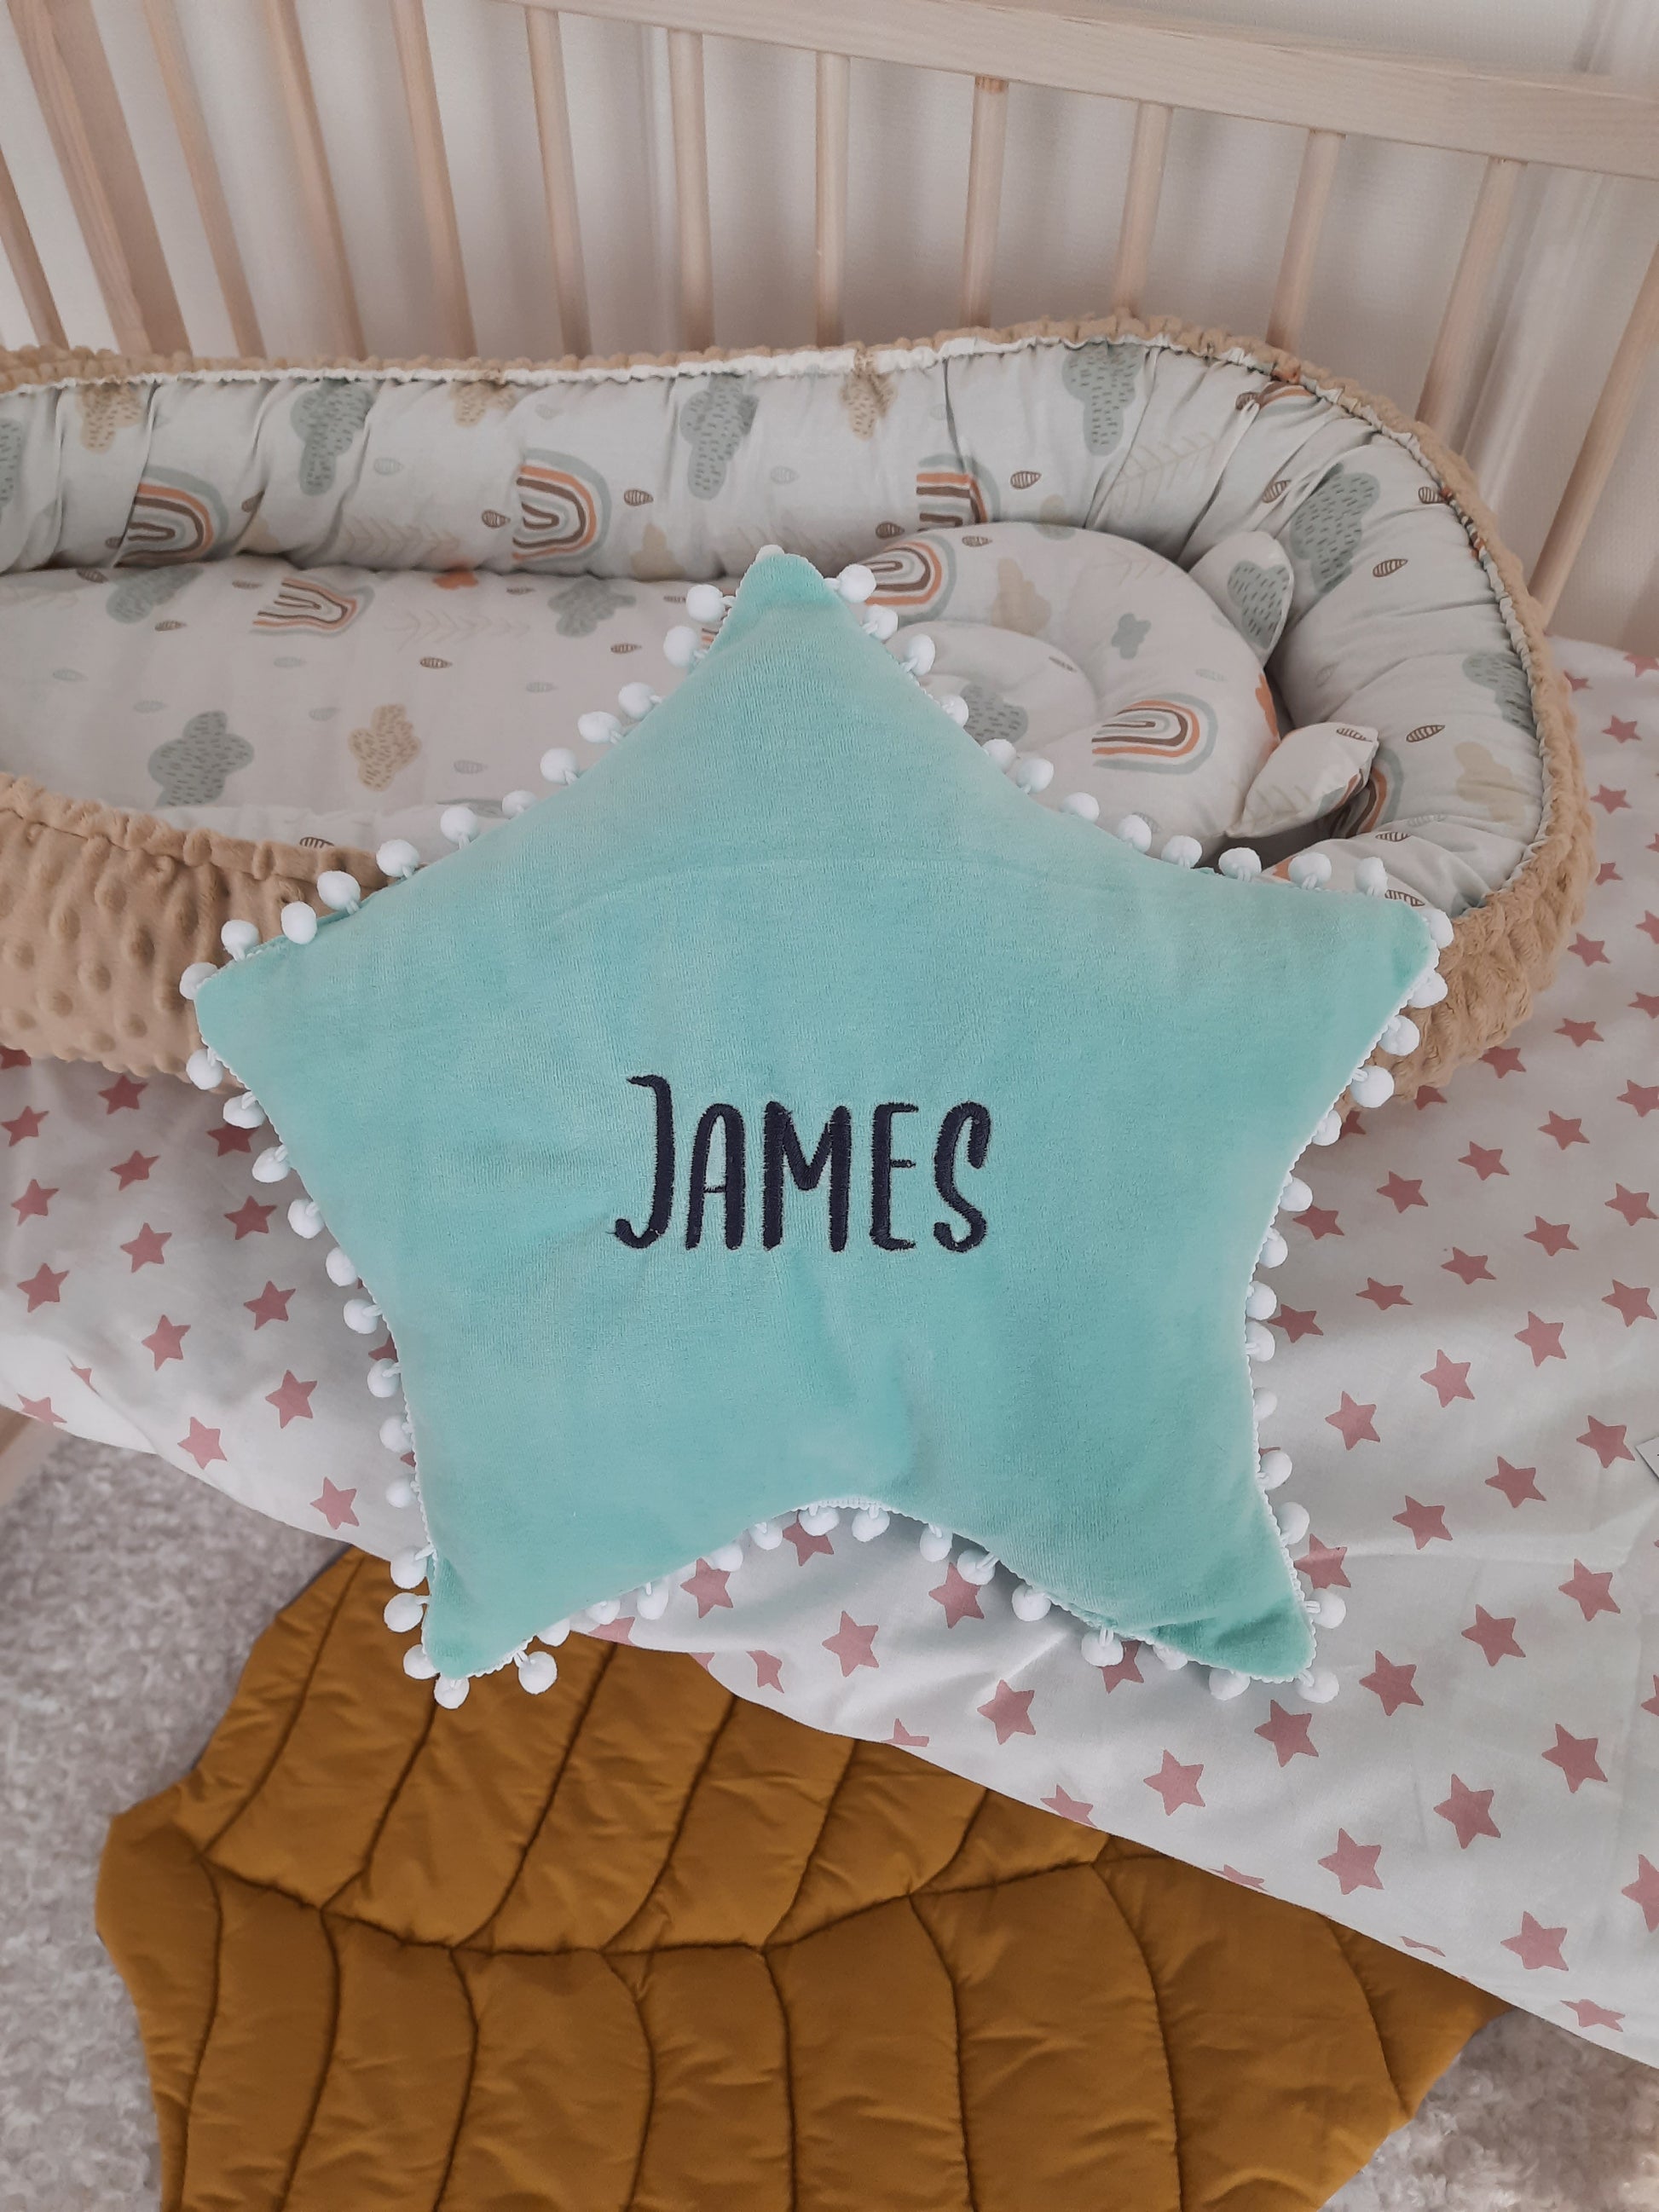 Blue star pillow and embroidered baby name James. Star pillow is a gift with the purchase of a braided bumper